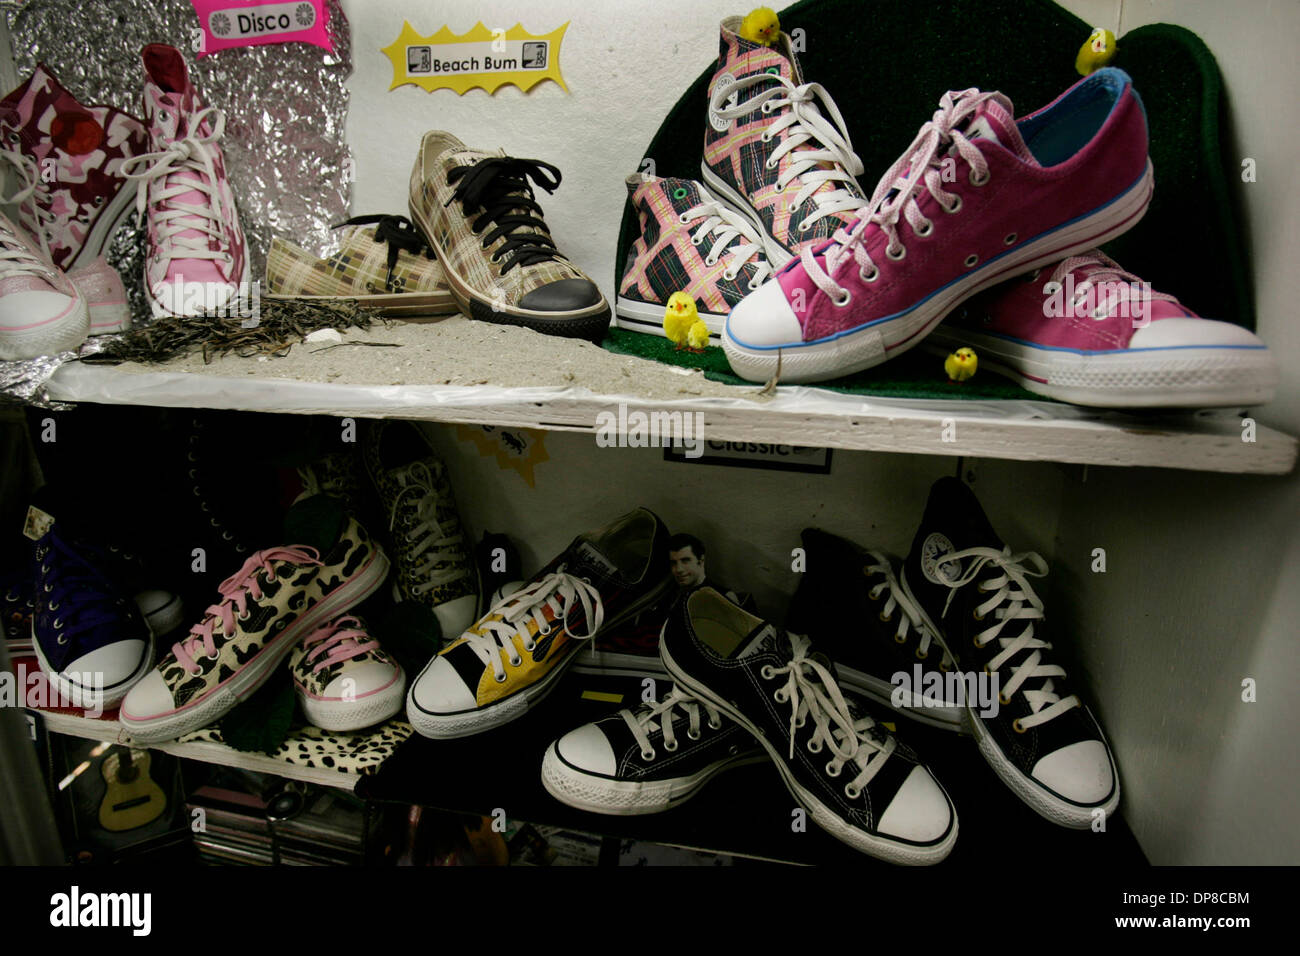 Published 6/29/2006, NC-1; B-4) June 28, 2006 Del Mar, CA. USA Display of  collections at this year's San Diego County Fair. Converse tennis shoes,  for instance. Mandatory credit: photo by Peggy Peattie/San